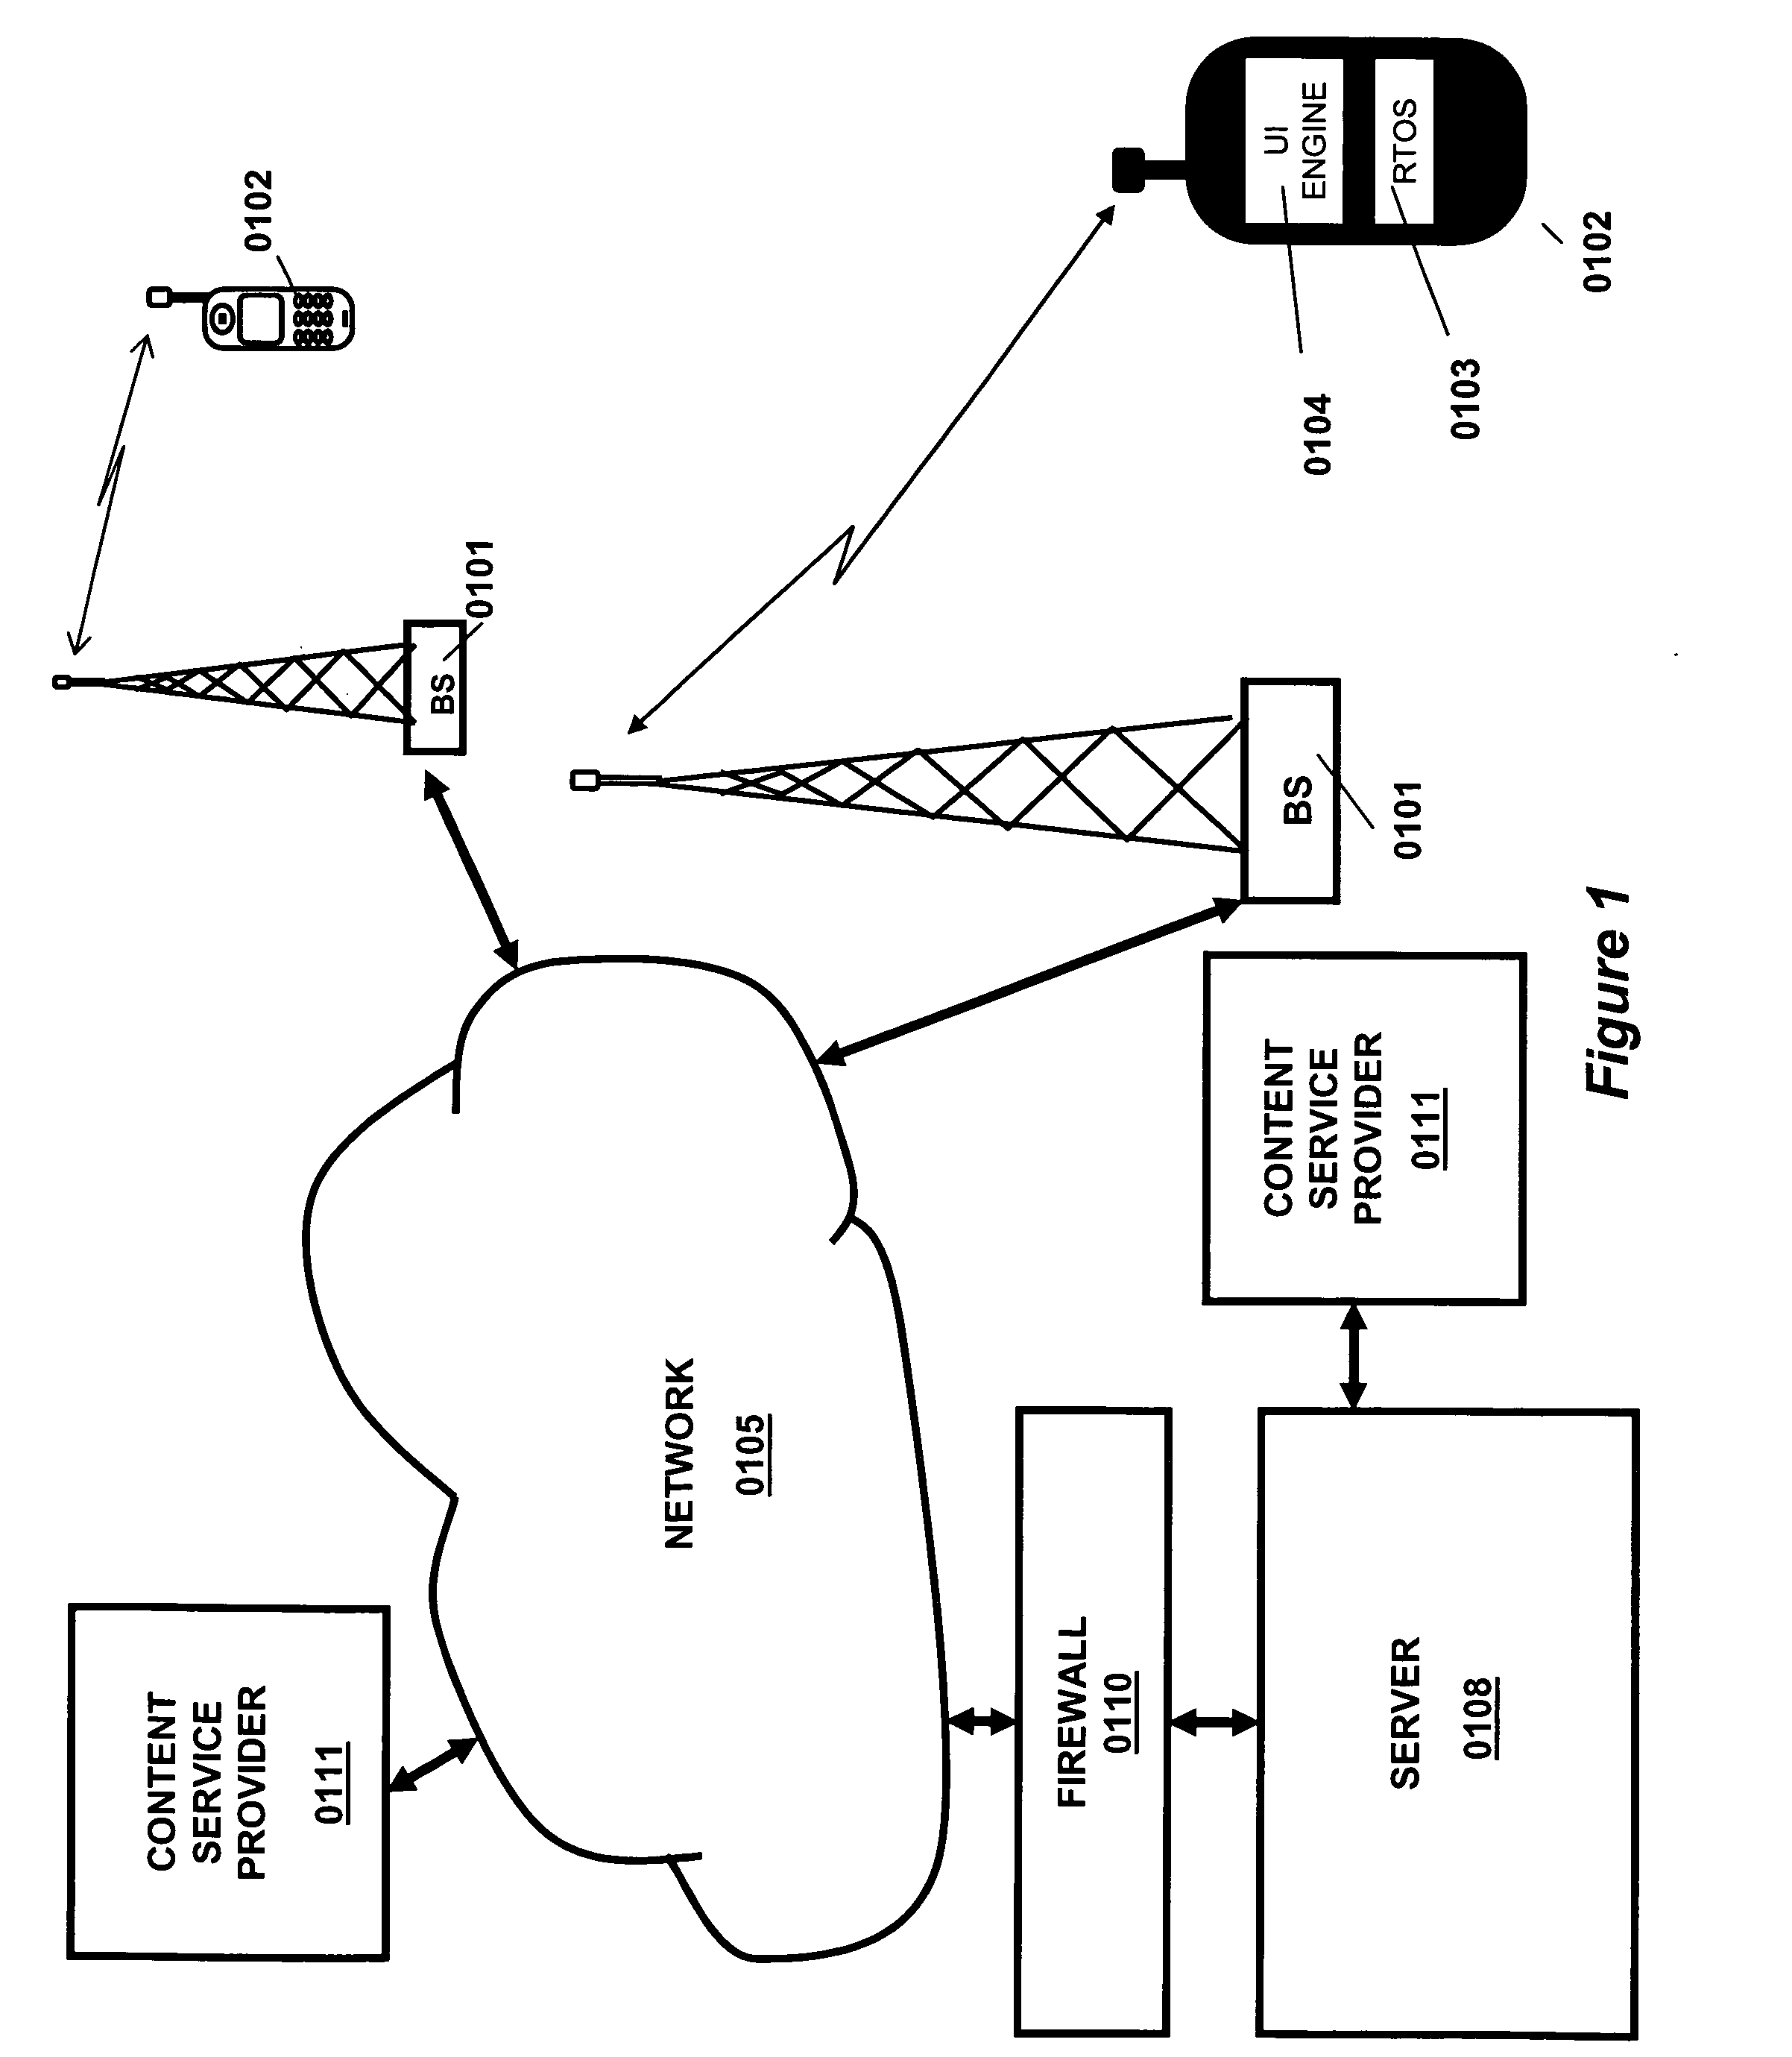 User interface system and method for implementation on multiple types of clients